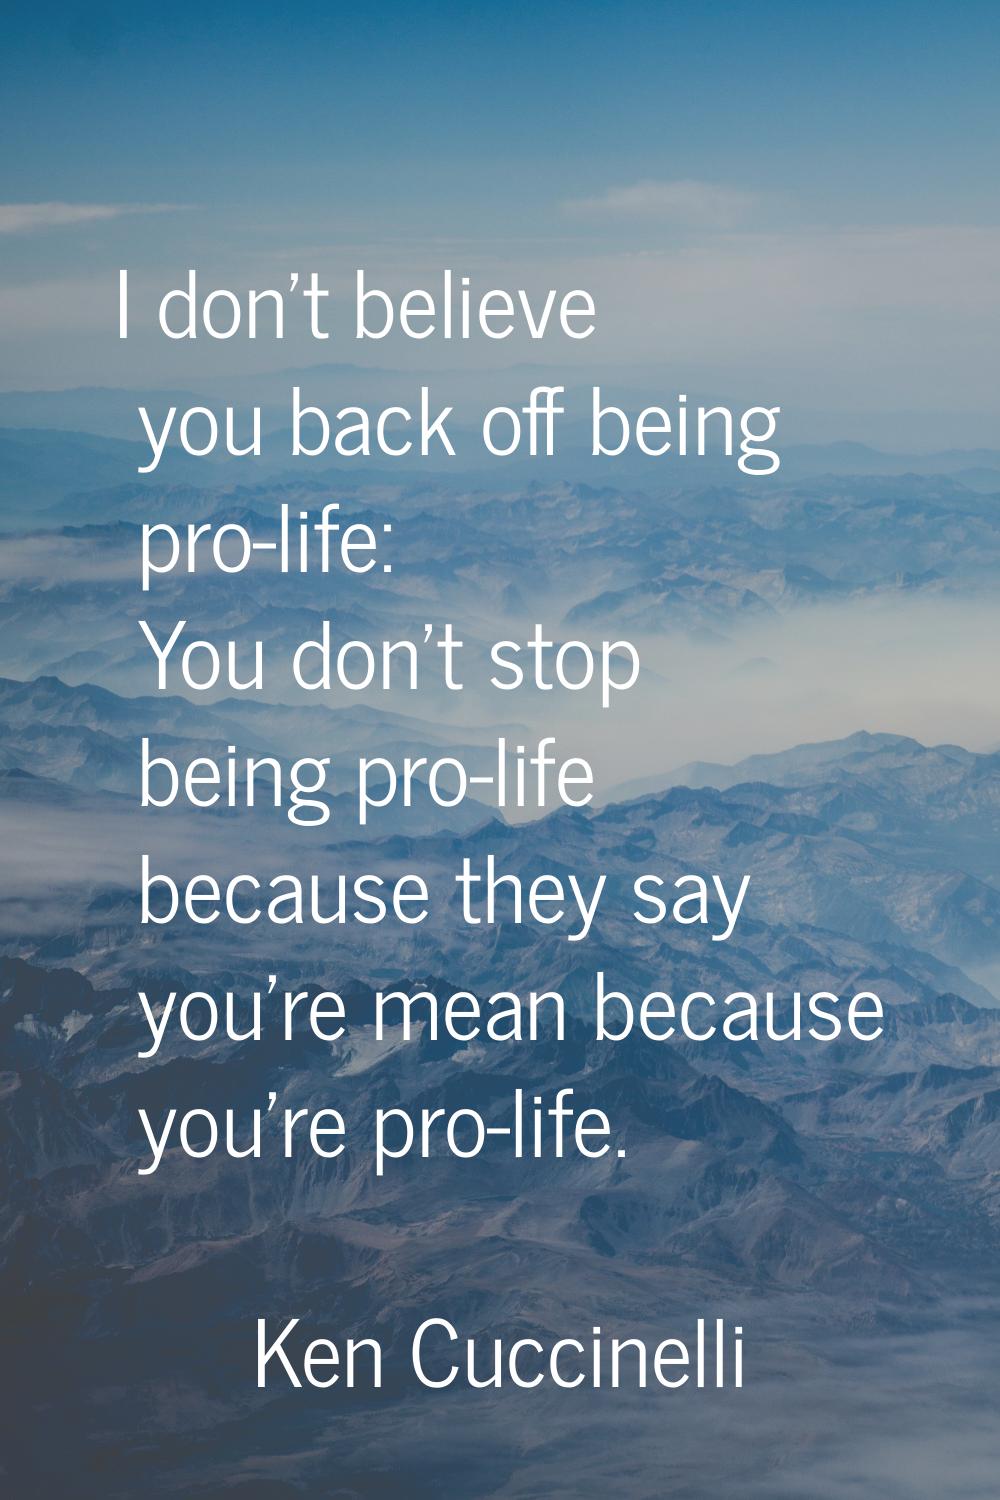 I don't believe you back off being pro-life: You don't stop being pro-life because they say you're 